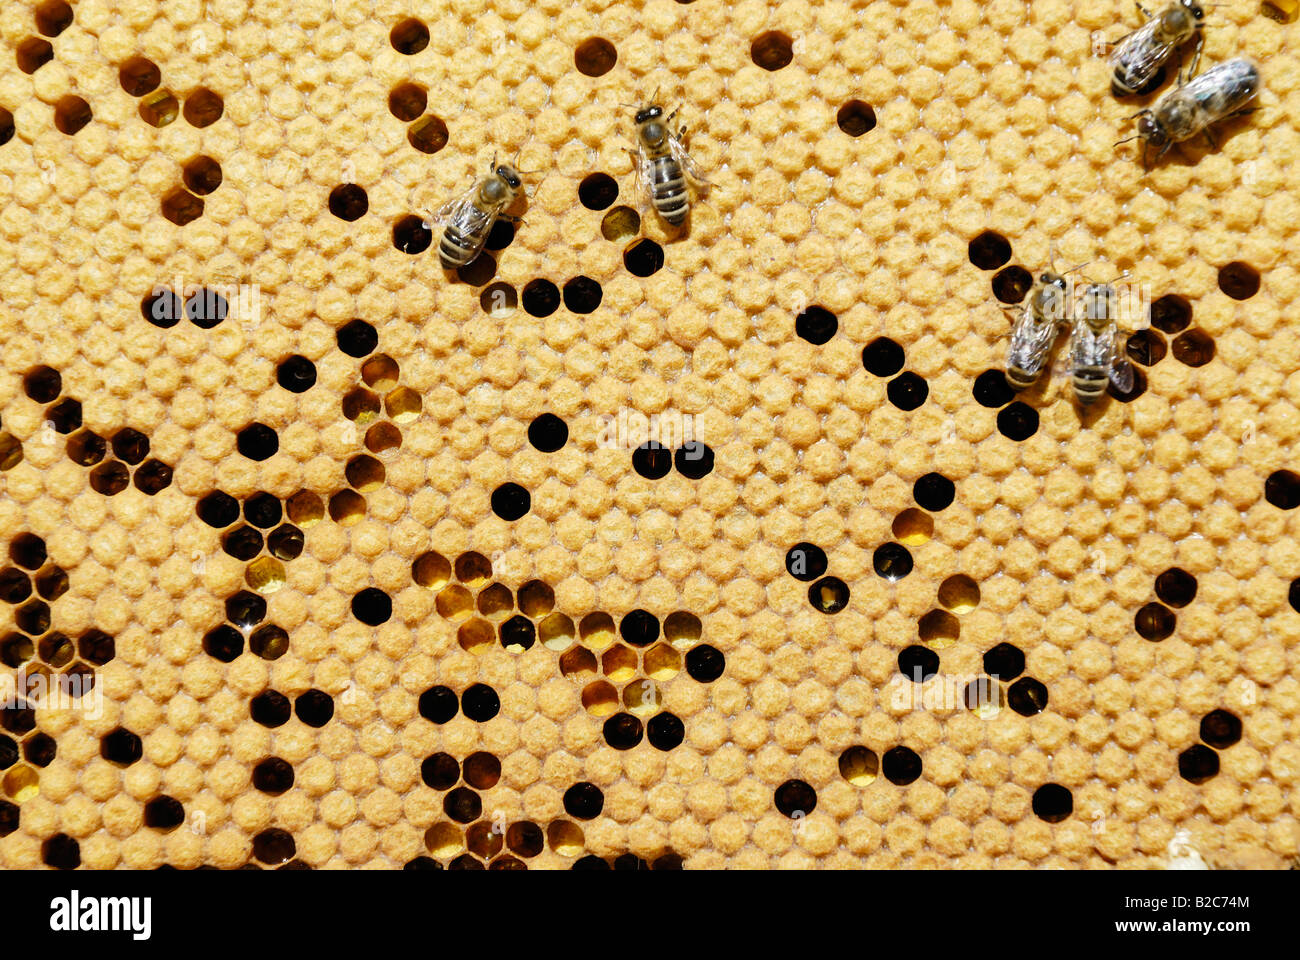 Bees (Apis mellifera var. carniola) on the honeycomb with covered cells and pollen Stock Photo